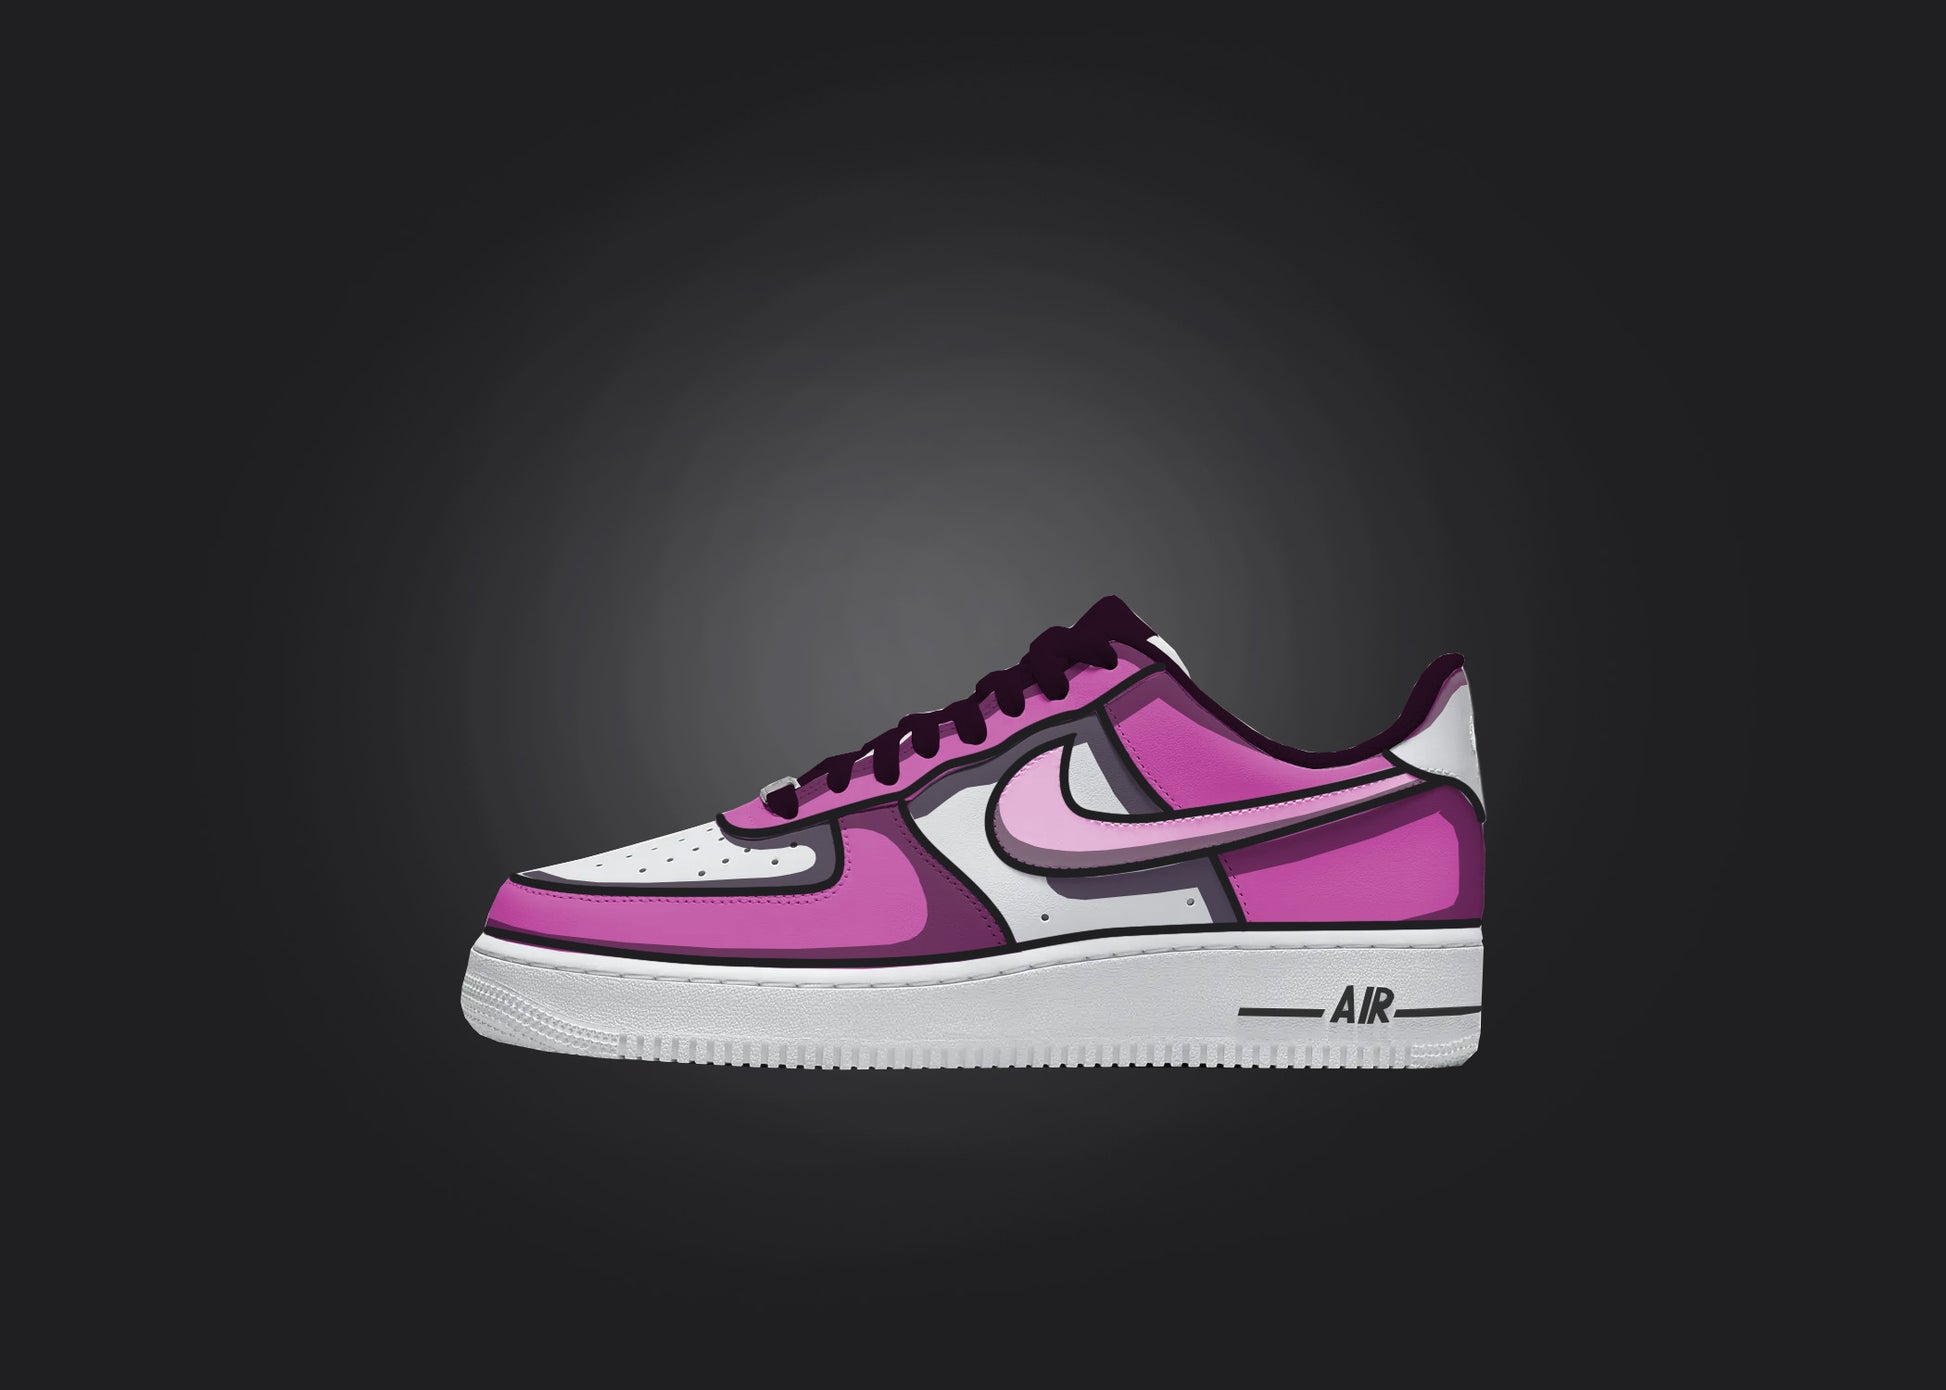 Single Custom Air Force 1 sneaker with pink and white shades set against a black backdrop, highlighting its unique cartoon shading technique.